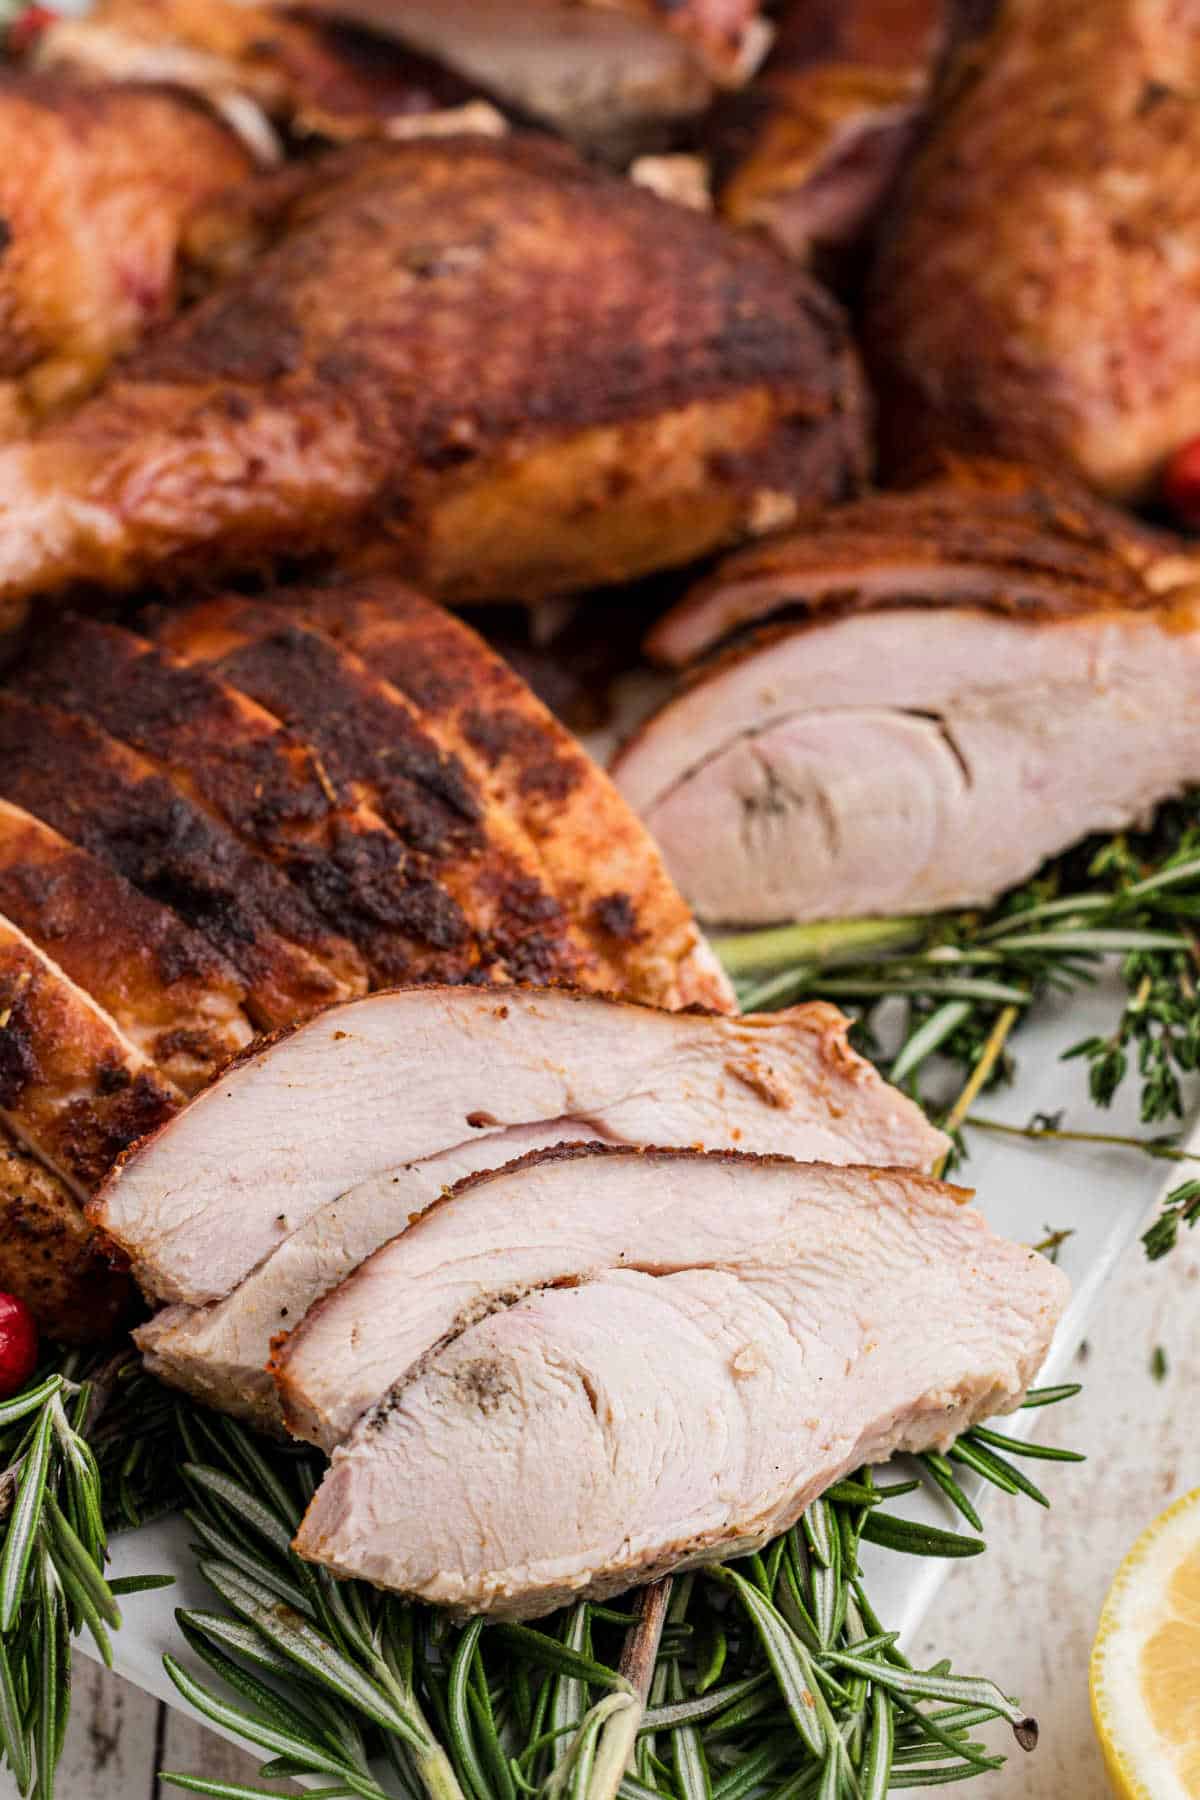 Sliced turkey that has been cooked using a smoked turkey rub recipe.